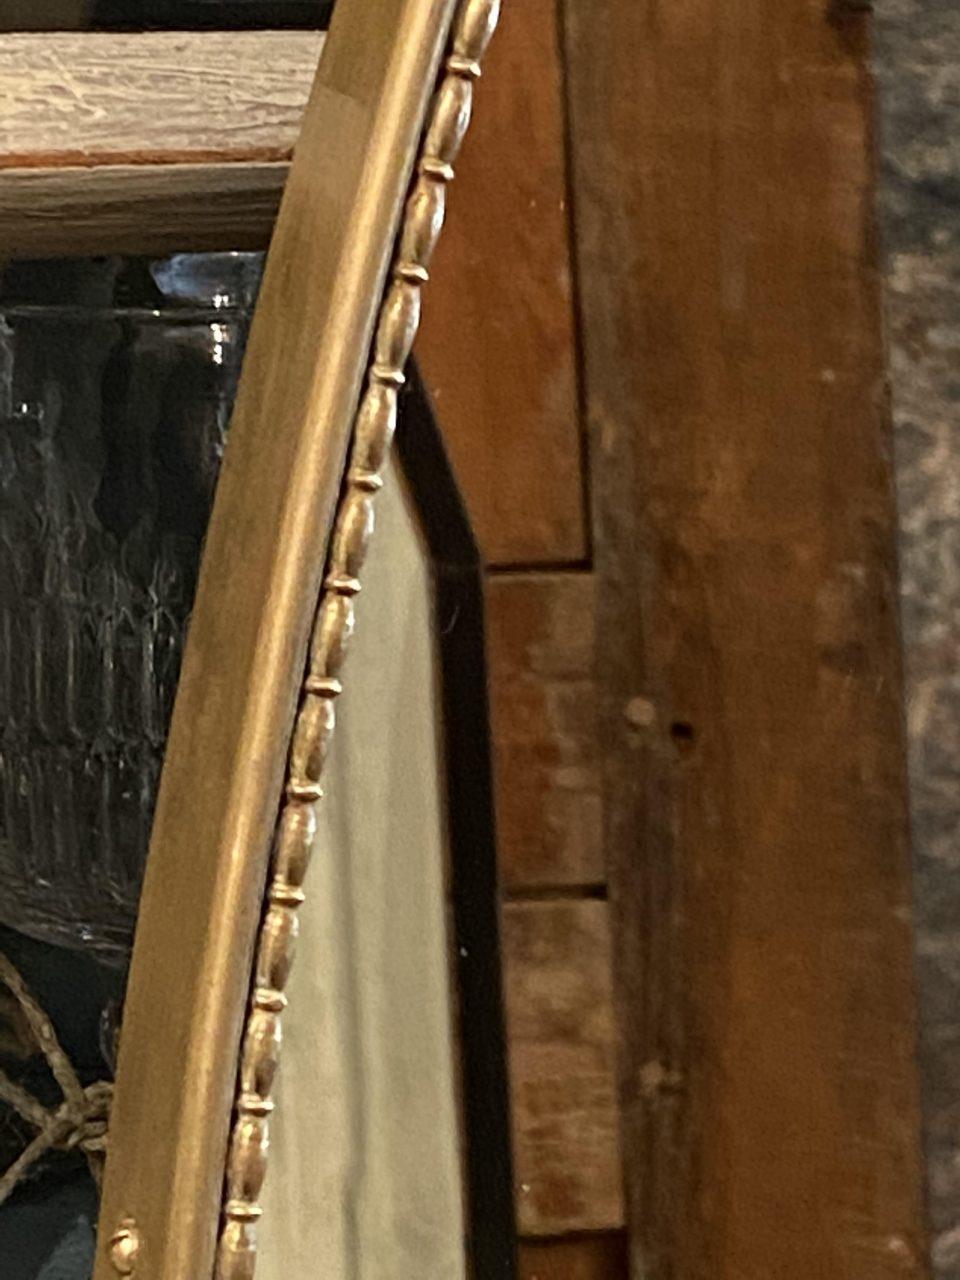 Elegant and stylish Italian midcentury brass framed mirror. Wonderful oval profile and a simple chain of elongated beading around the frame, and beautiful patina. Original mirrored glass, and style wise attributed to the designer Gio Ponti.